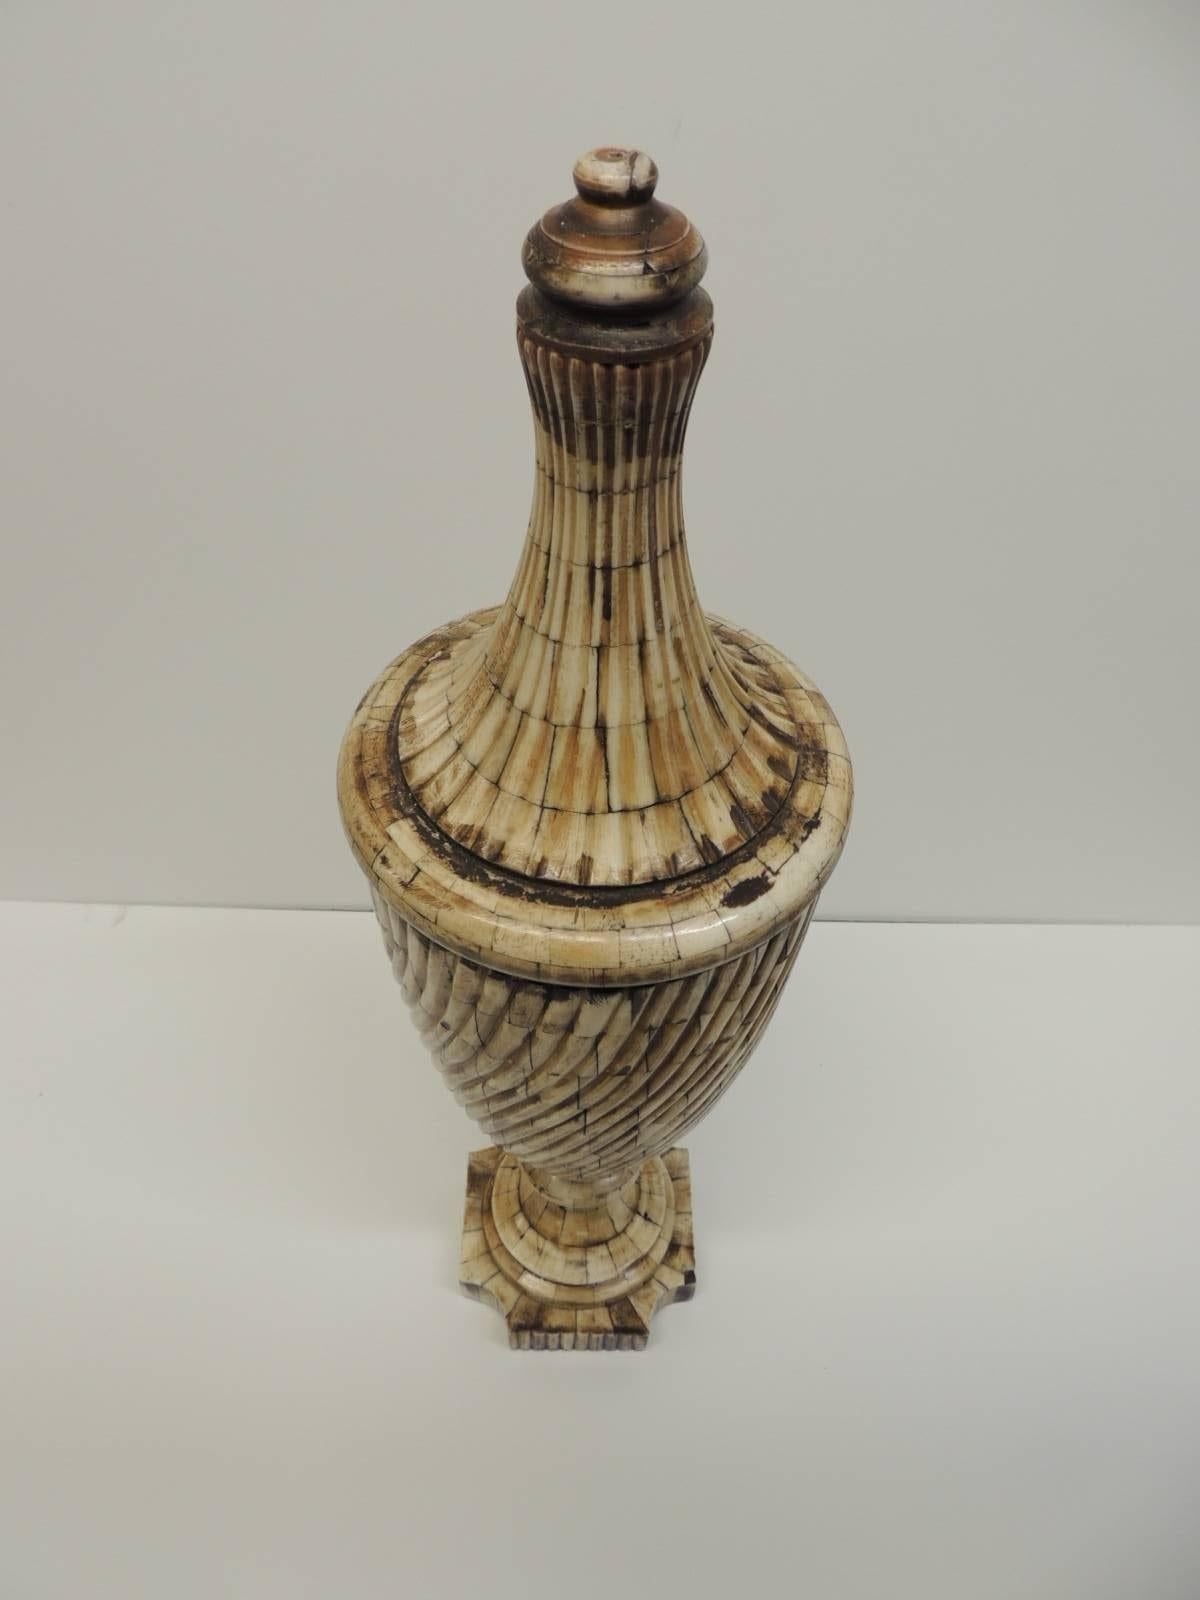 Vintage Indian camel bone urn
Camel bone Indian vintage urn with a lid made of bones inlaid on wood. With a hollow inside painted in black, India, 1960s
Size:
Base is: 4.5 x 4.5
Height is 20.5
Depth is 6.5.
 